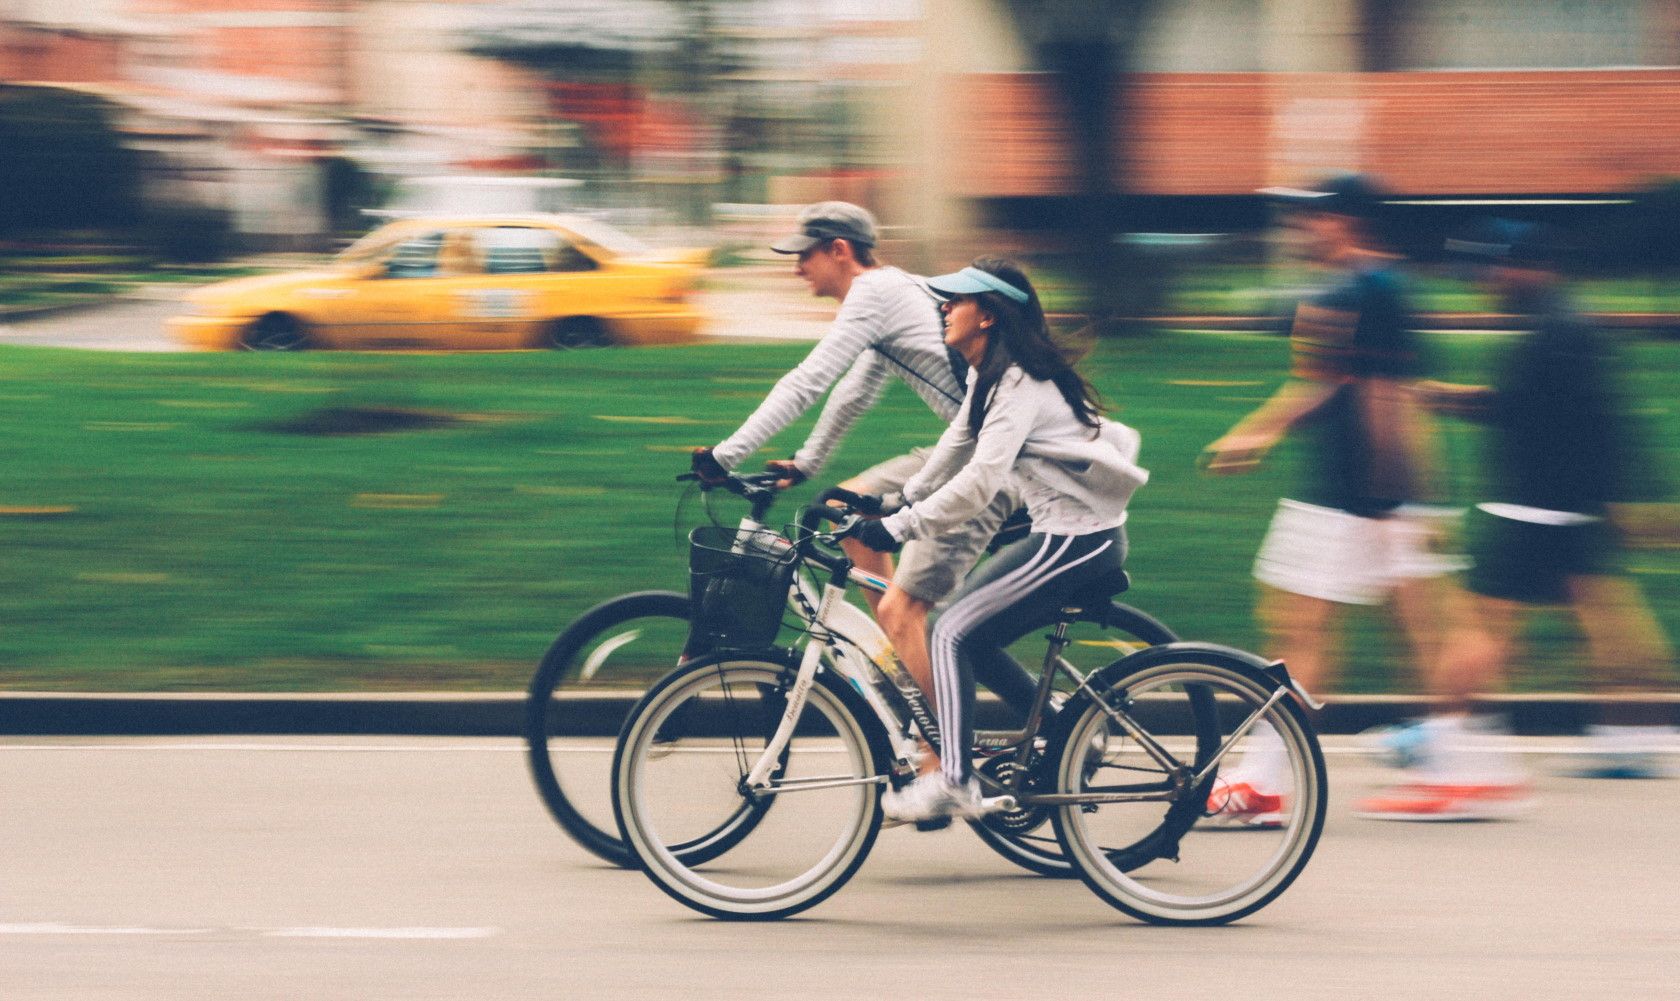 couple cycling outdoors in busy street